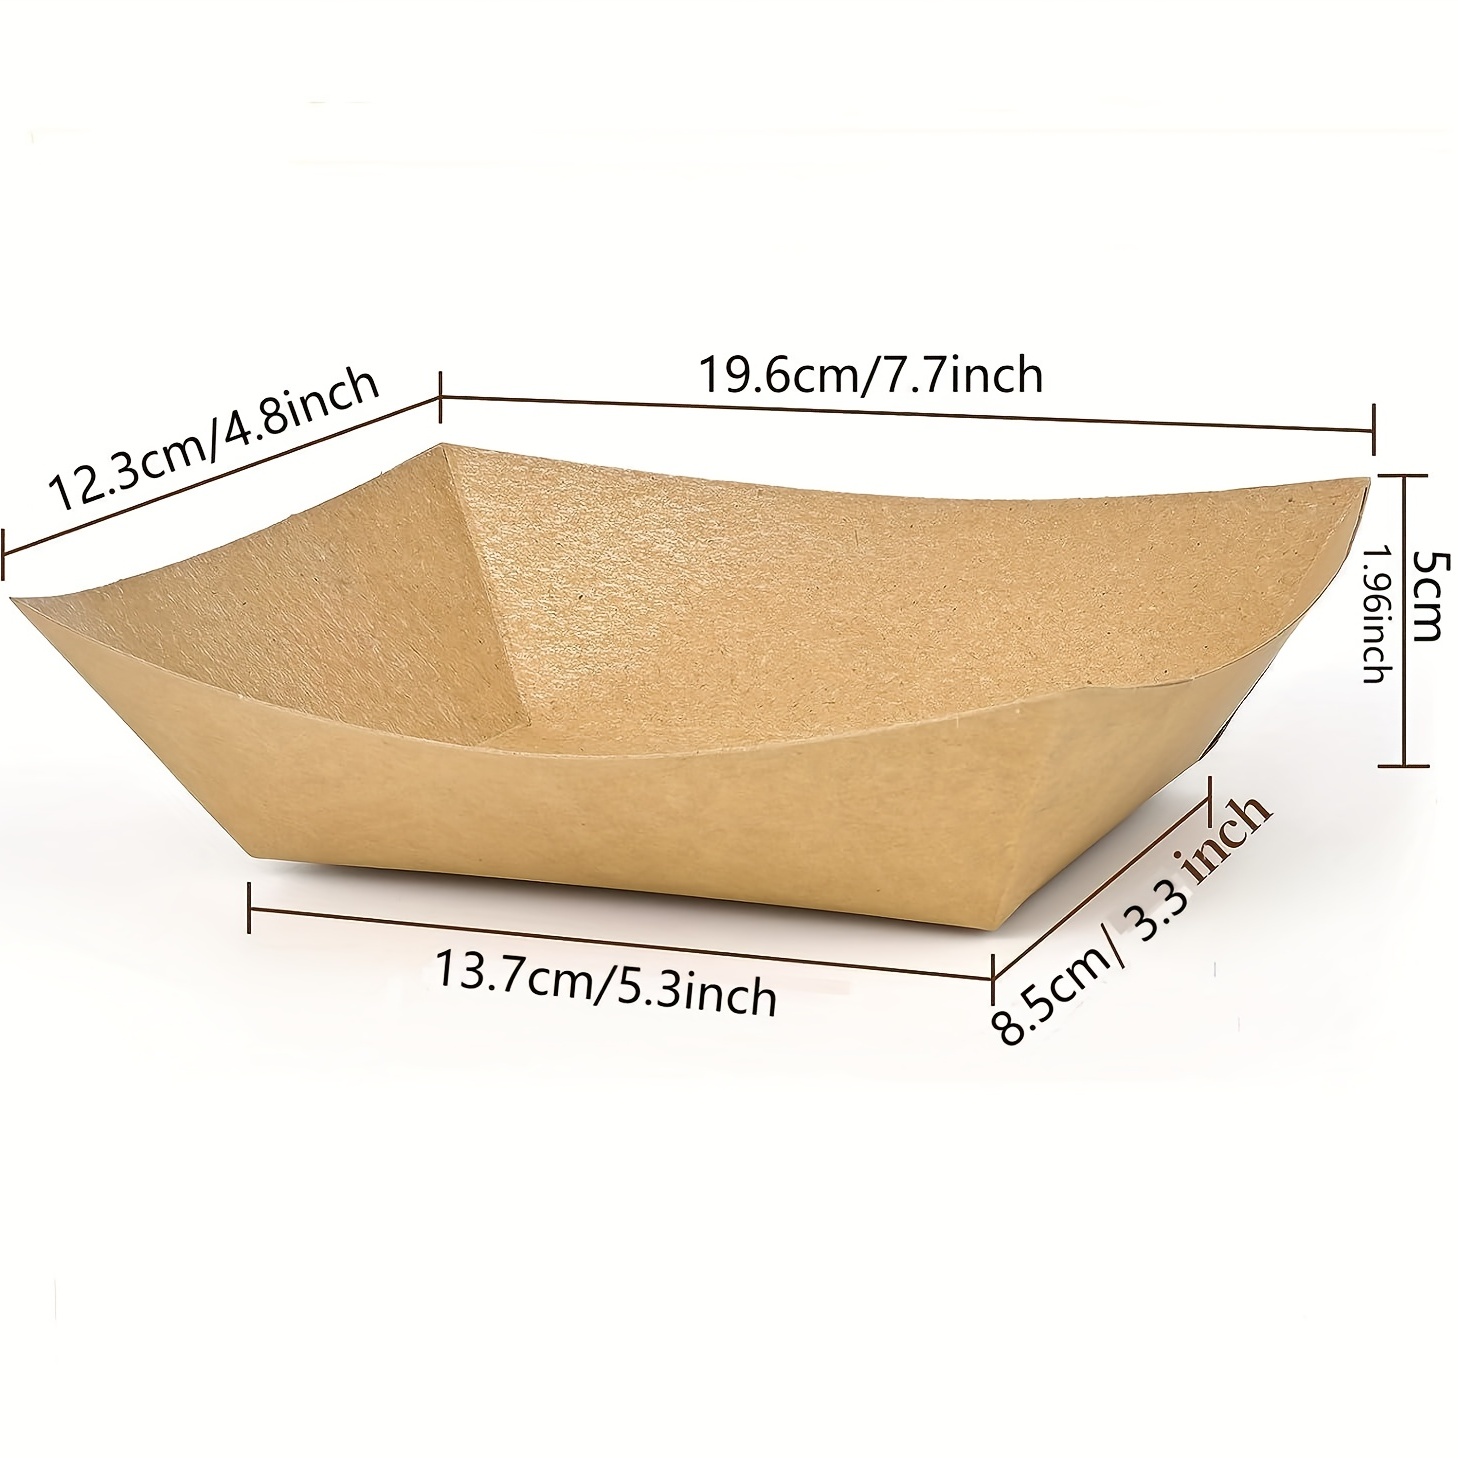 Stock Your Home [250 Pack] Extra Large Disposable Brown Kraft Paper Food  Trays, 3-Lb Concession Tray, Serving Boats for Party Snacks, Taco Bar